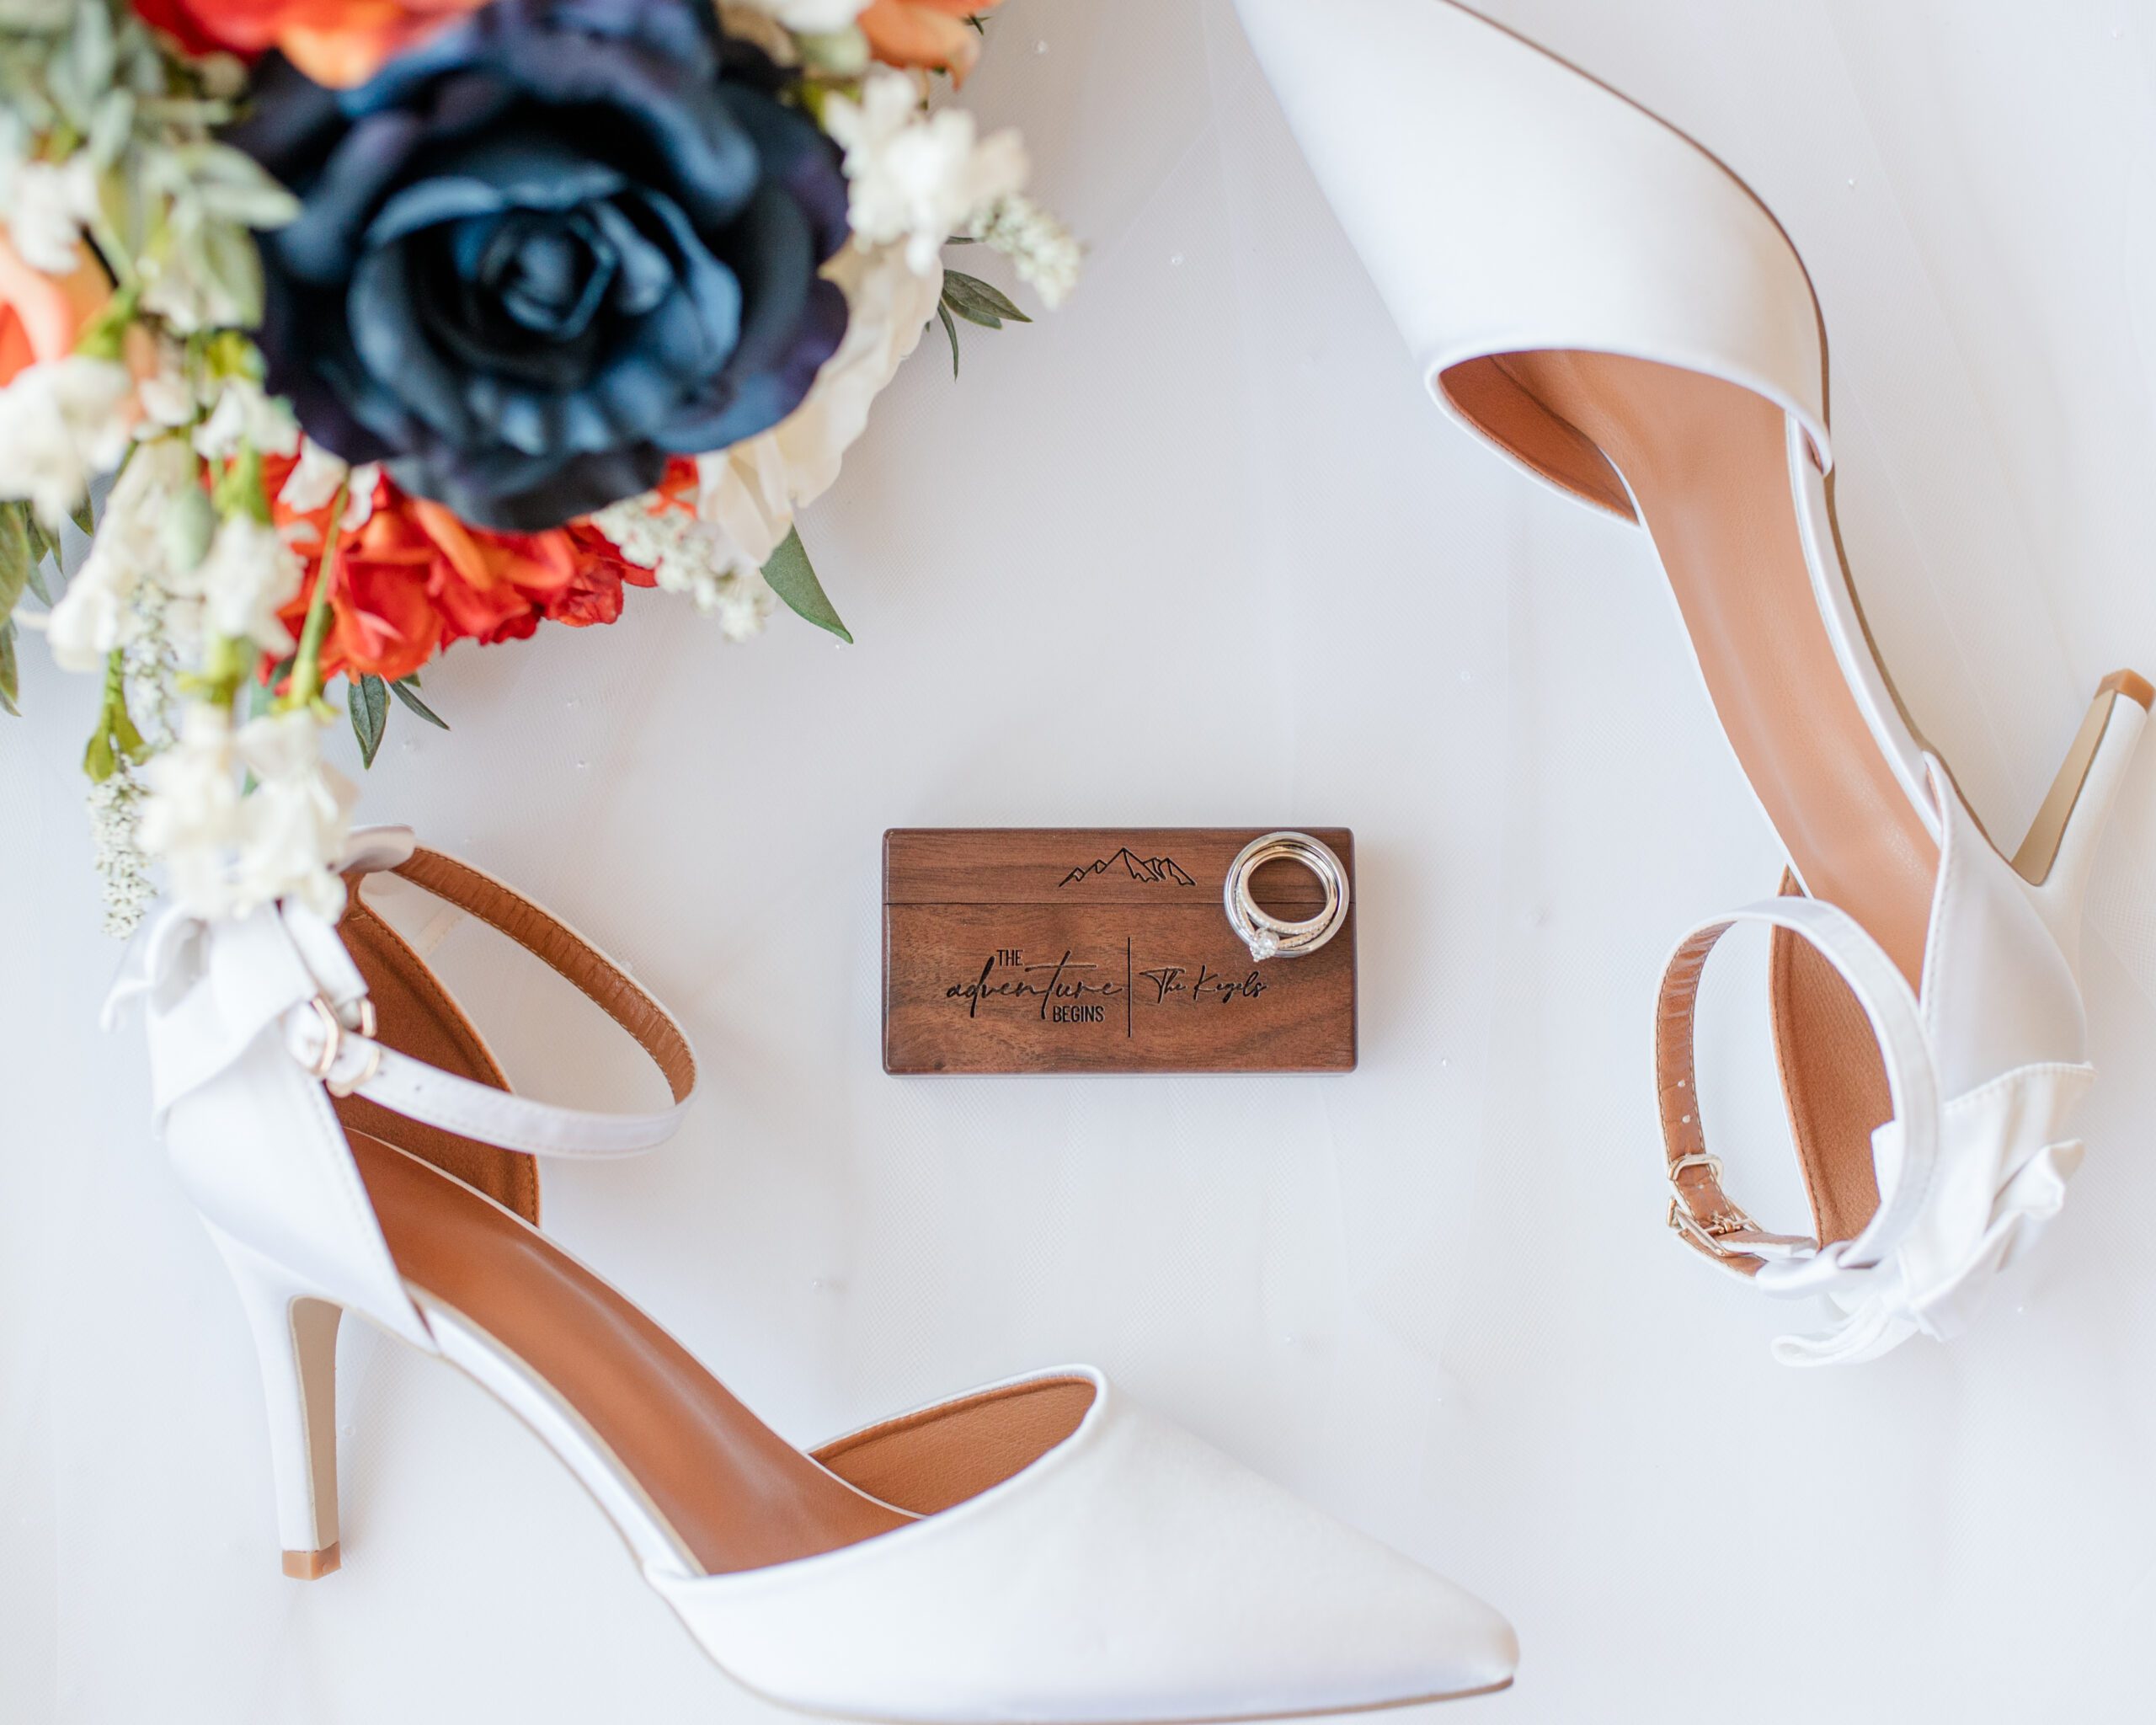 Bridal details of her white heals, shoes, ring box and rings